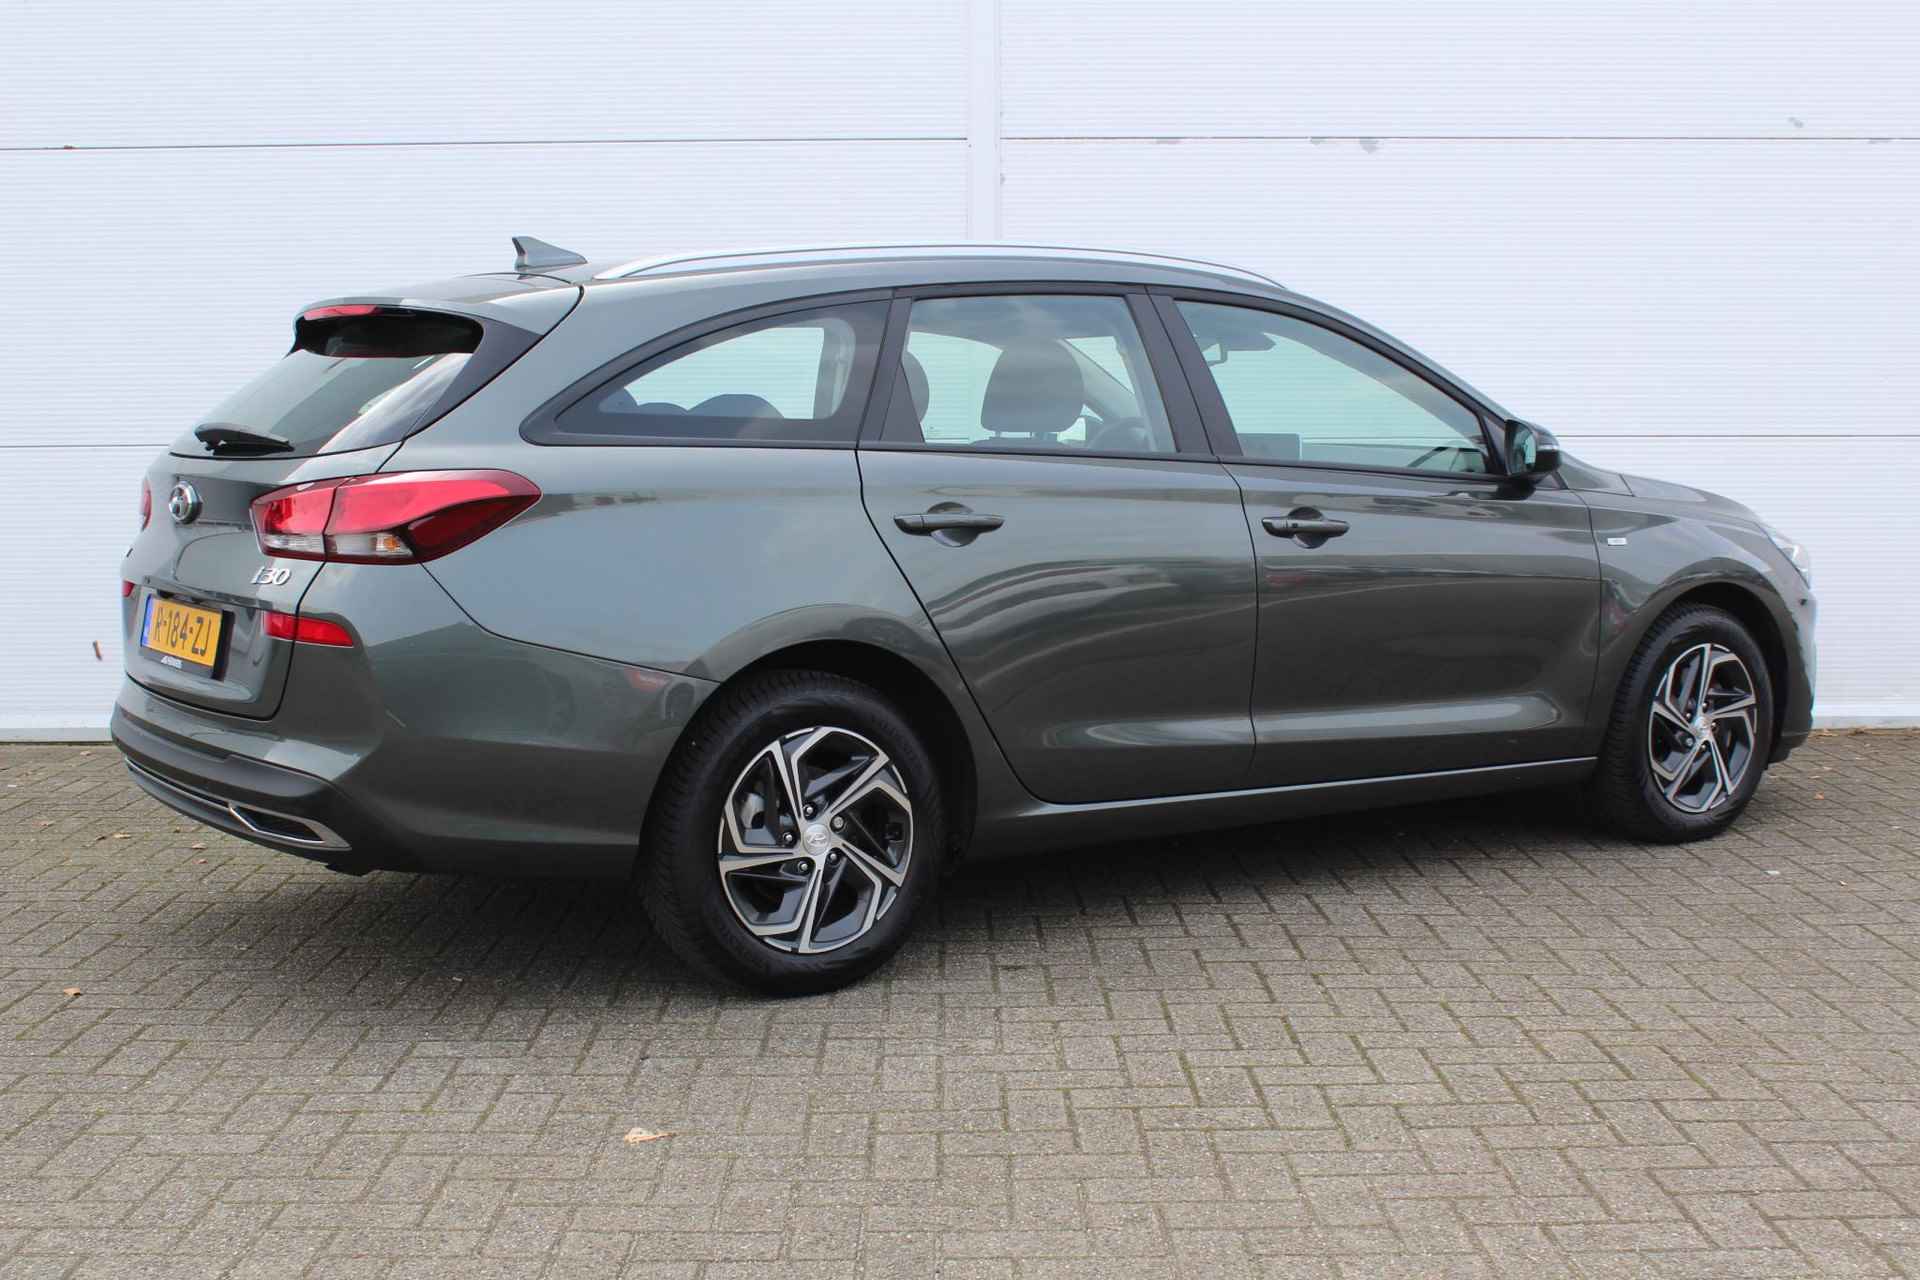 Hyundai i30 Wagon 1.0 T-GDi MHEV Comfort Smart AUTOMAAT / Navigatie + Apple Carplay/Android Auto / Cruise Control / Achteruitrijcamera / Climate Control / Keyless Entry & Start / - 3/43